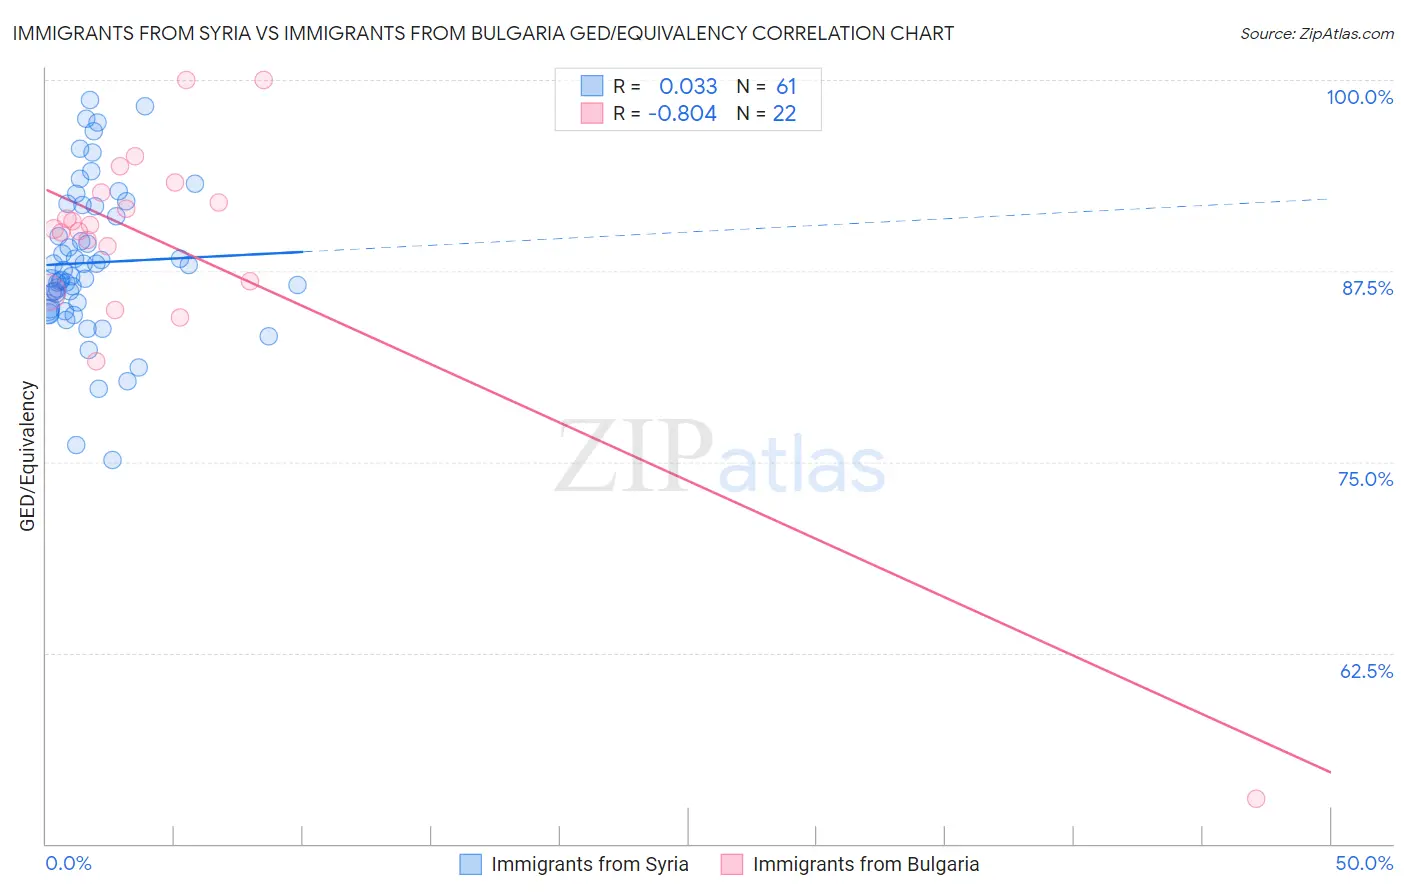 Immigrants from Syria vs Immigrants from Bulgaria GED/Equivalency